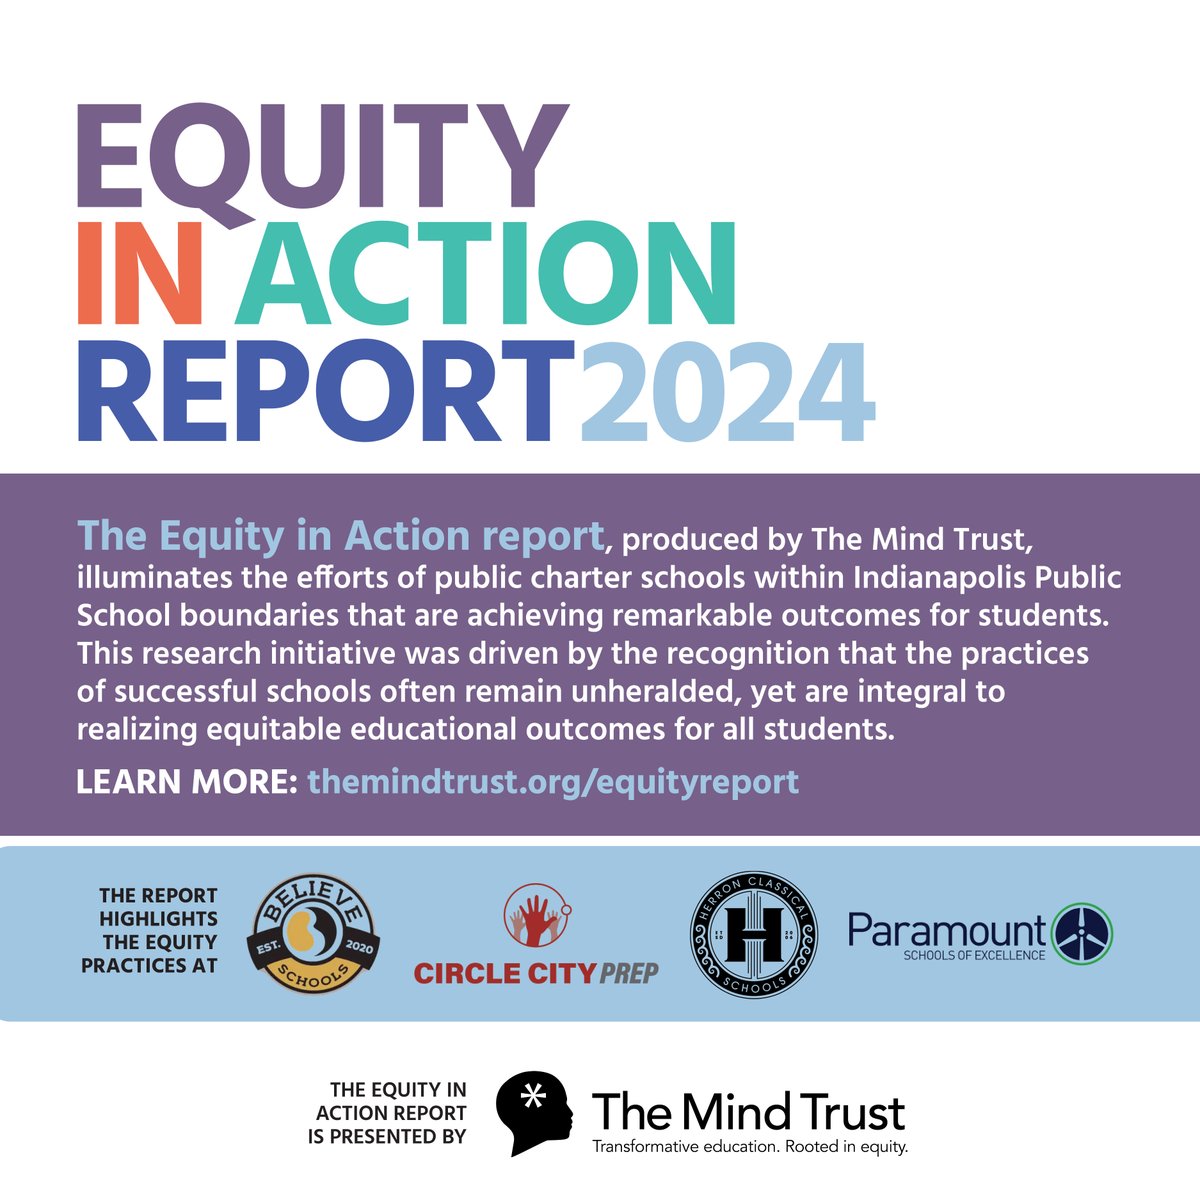 Too often in education, the term 'equity' is used as an excuse to lower expectations. @TheMindTrust believes that students thrive when educators hold high expectations & provide support to help students achieve academic excellence. Check out our report! themindtrust.org/equityreport/